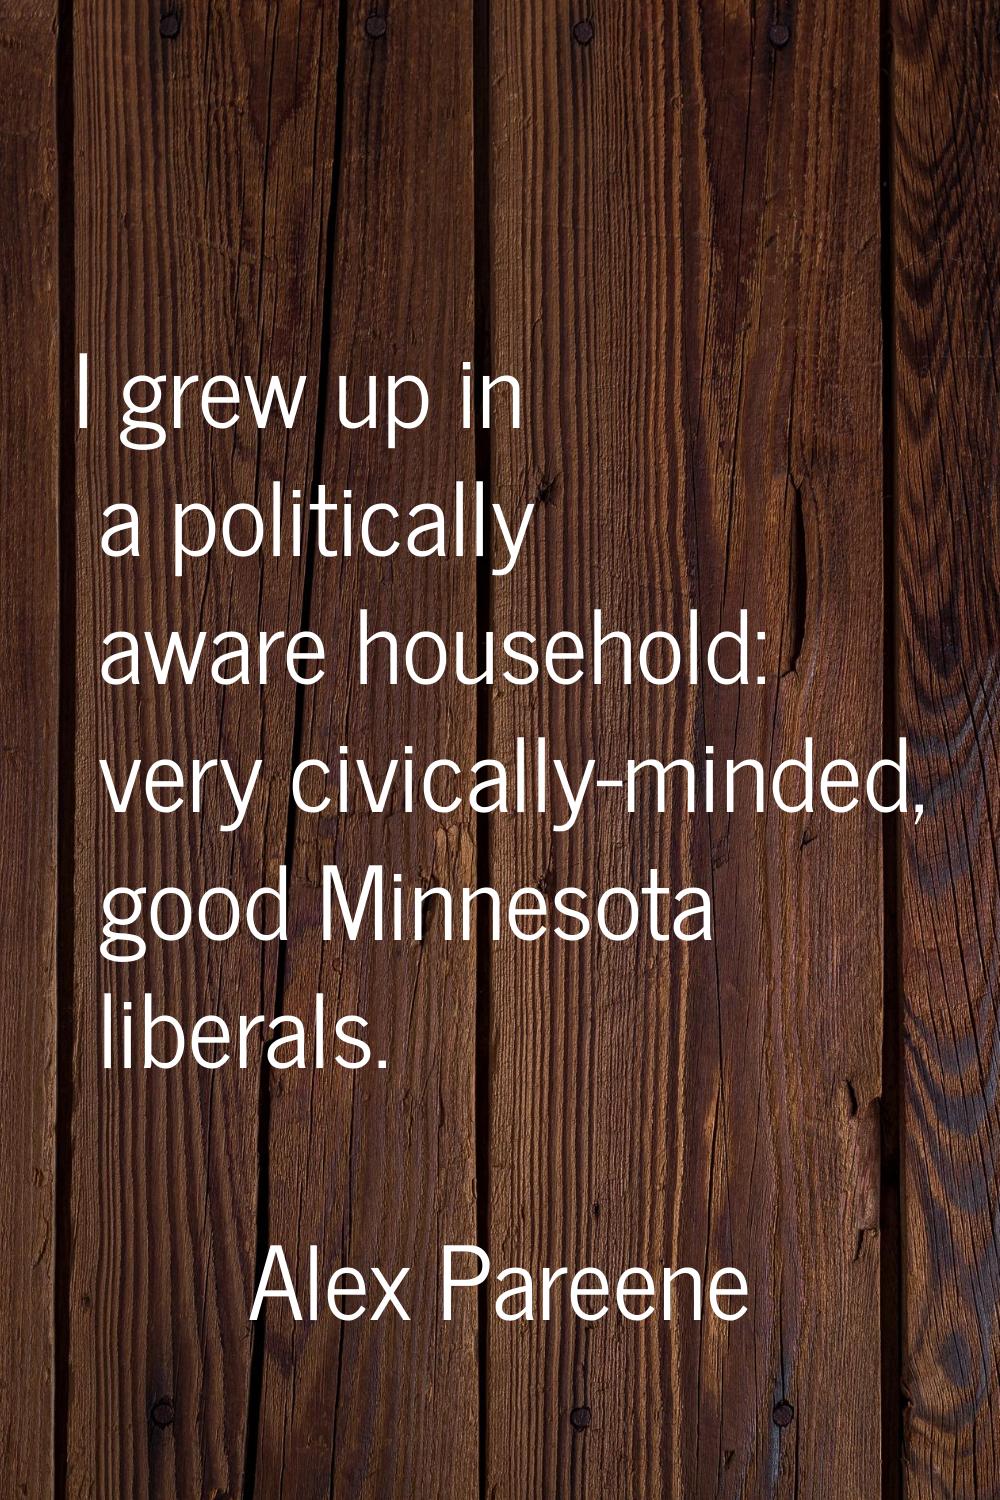 I grew up in a politically aware household: very civically-minded, good Minnesota liberals.